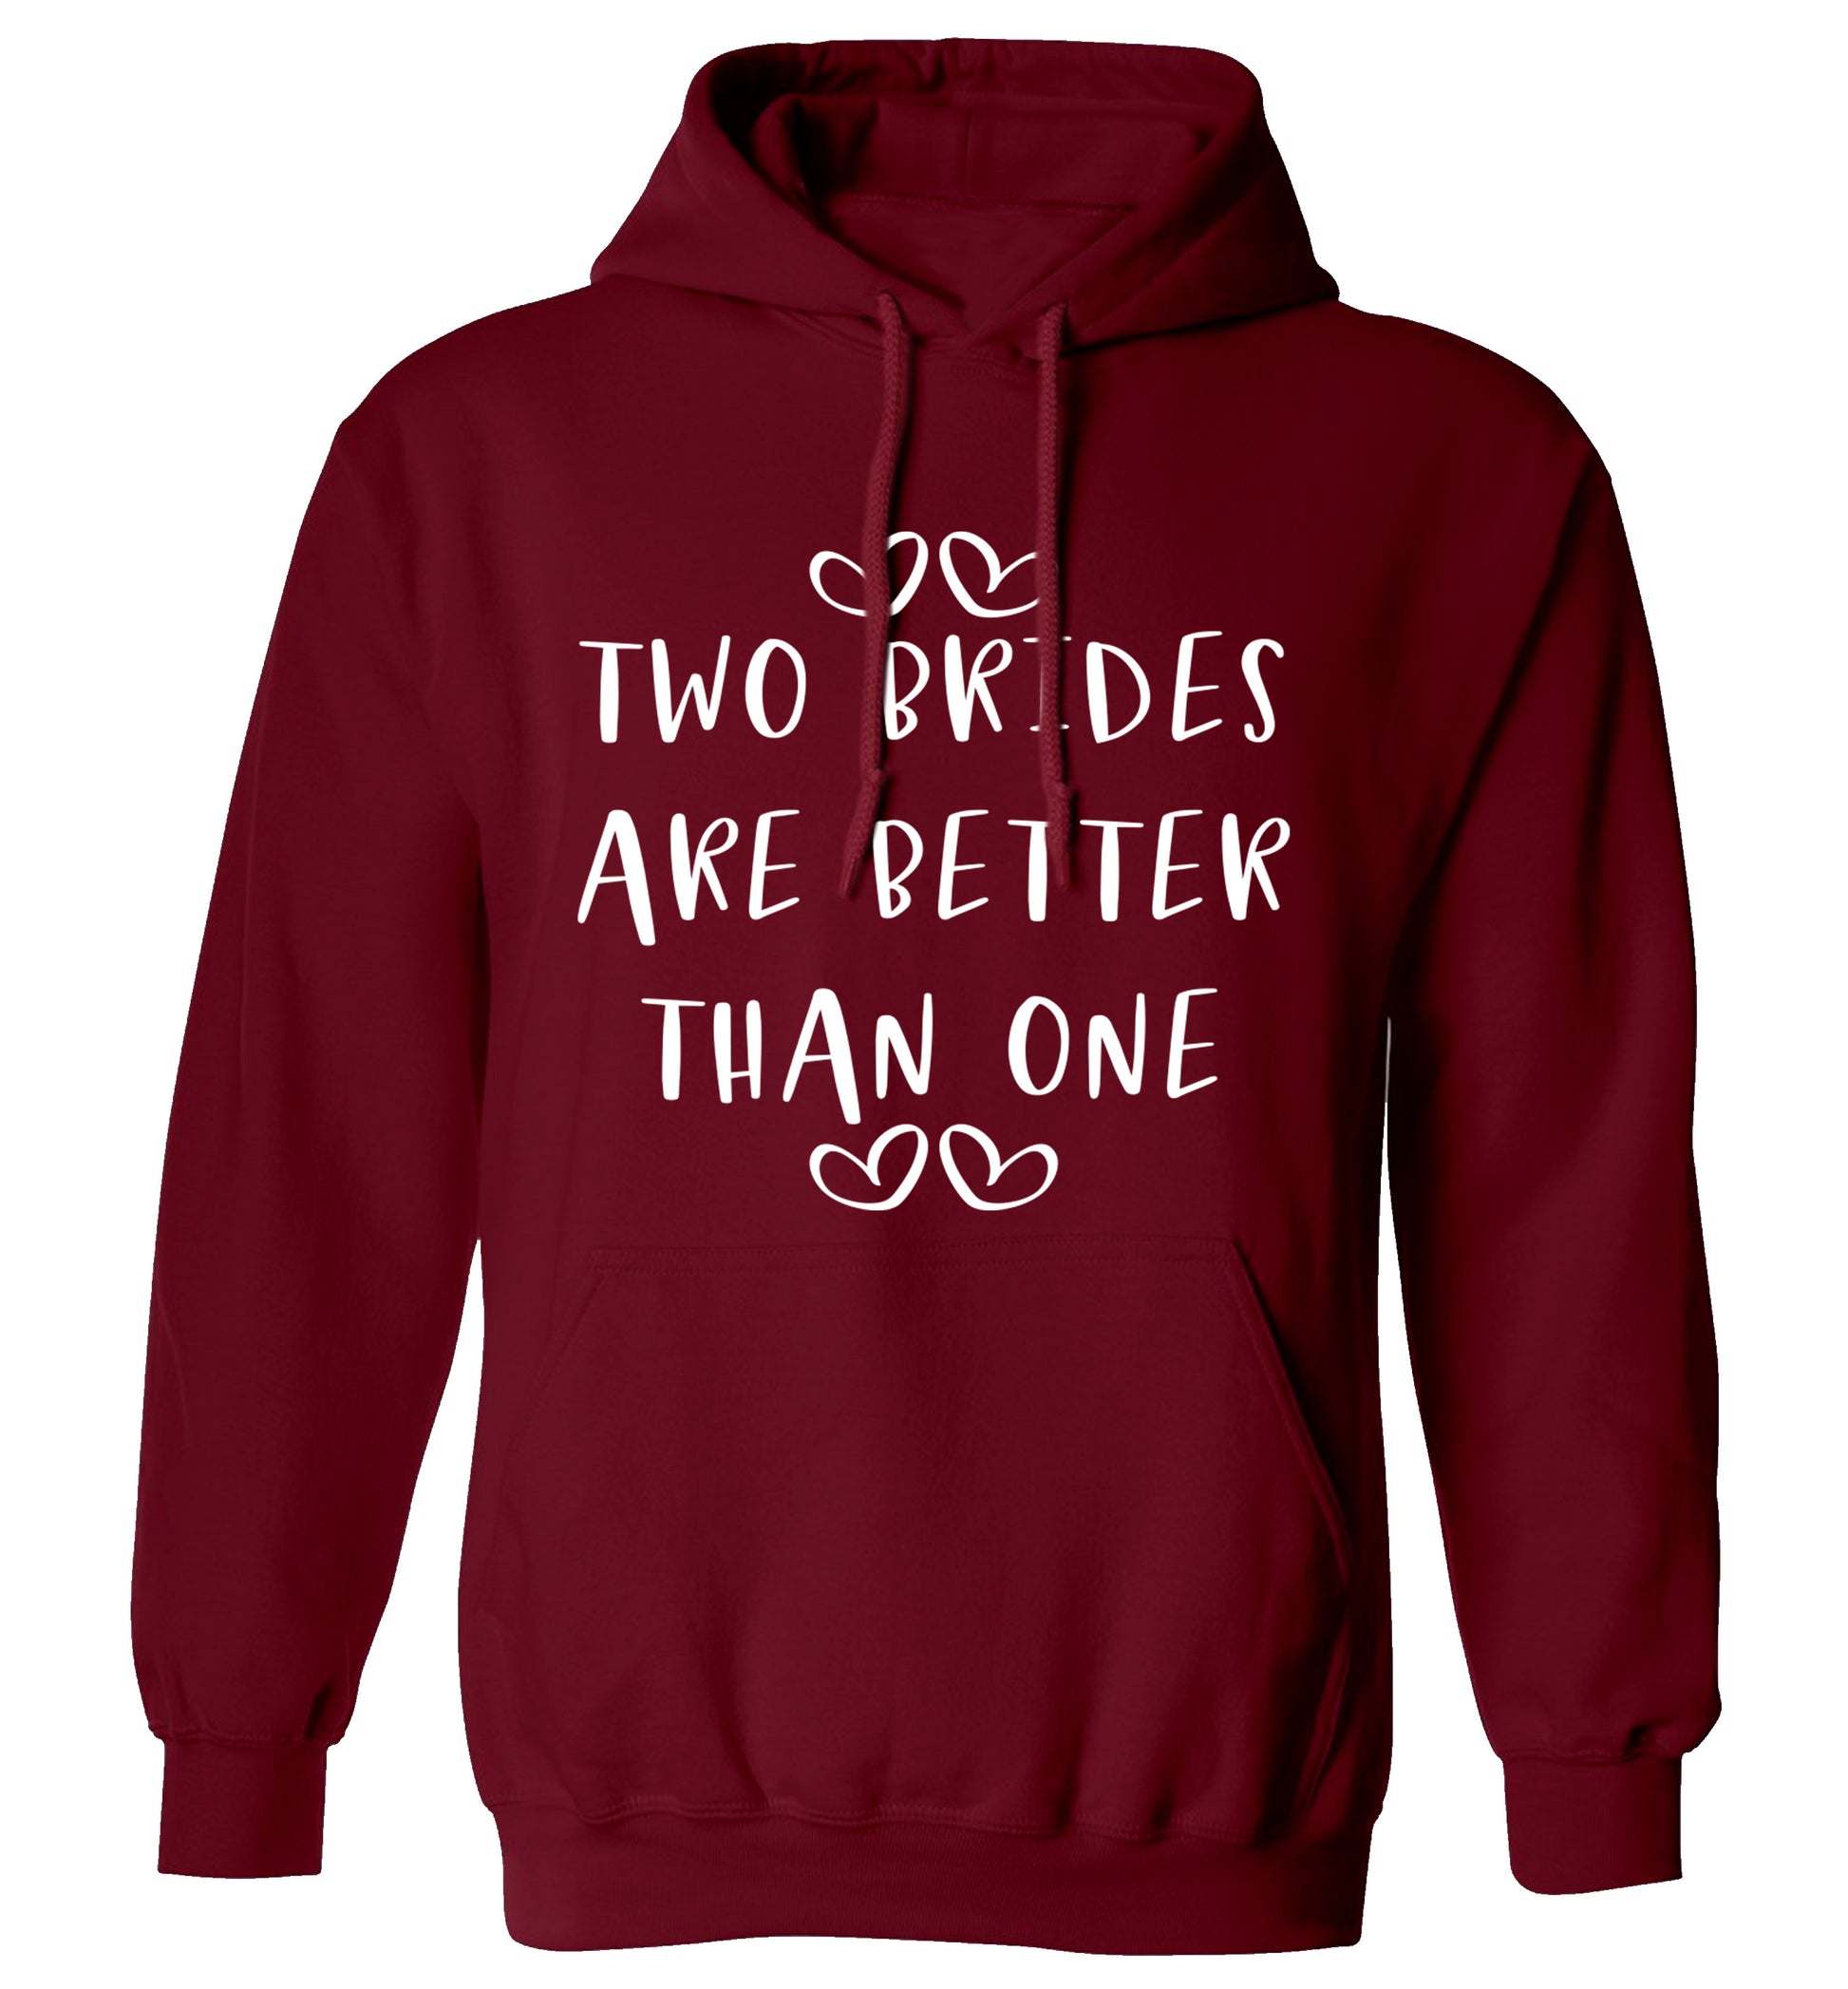 Two brides are better than one adults unisex maroon hoodie 2XL